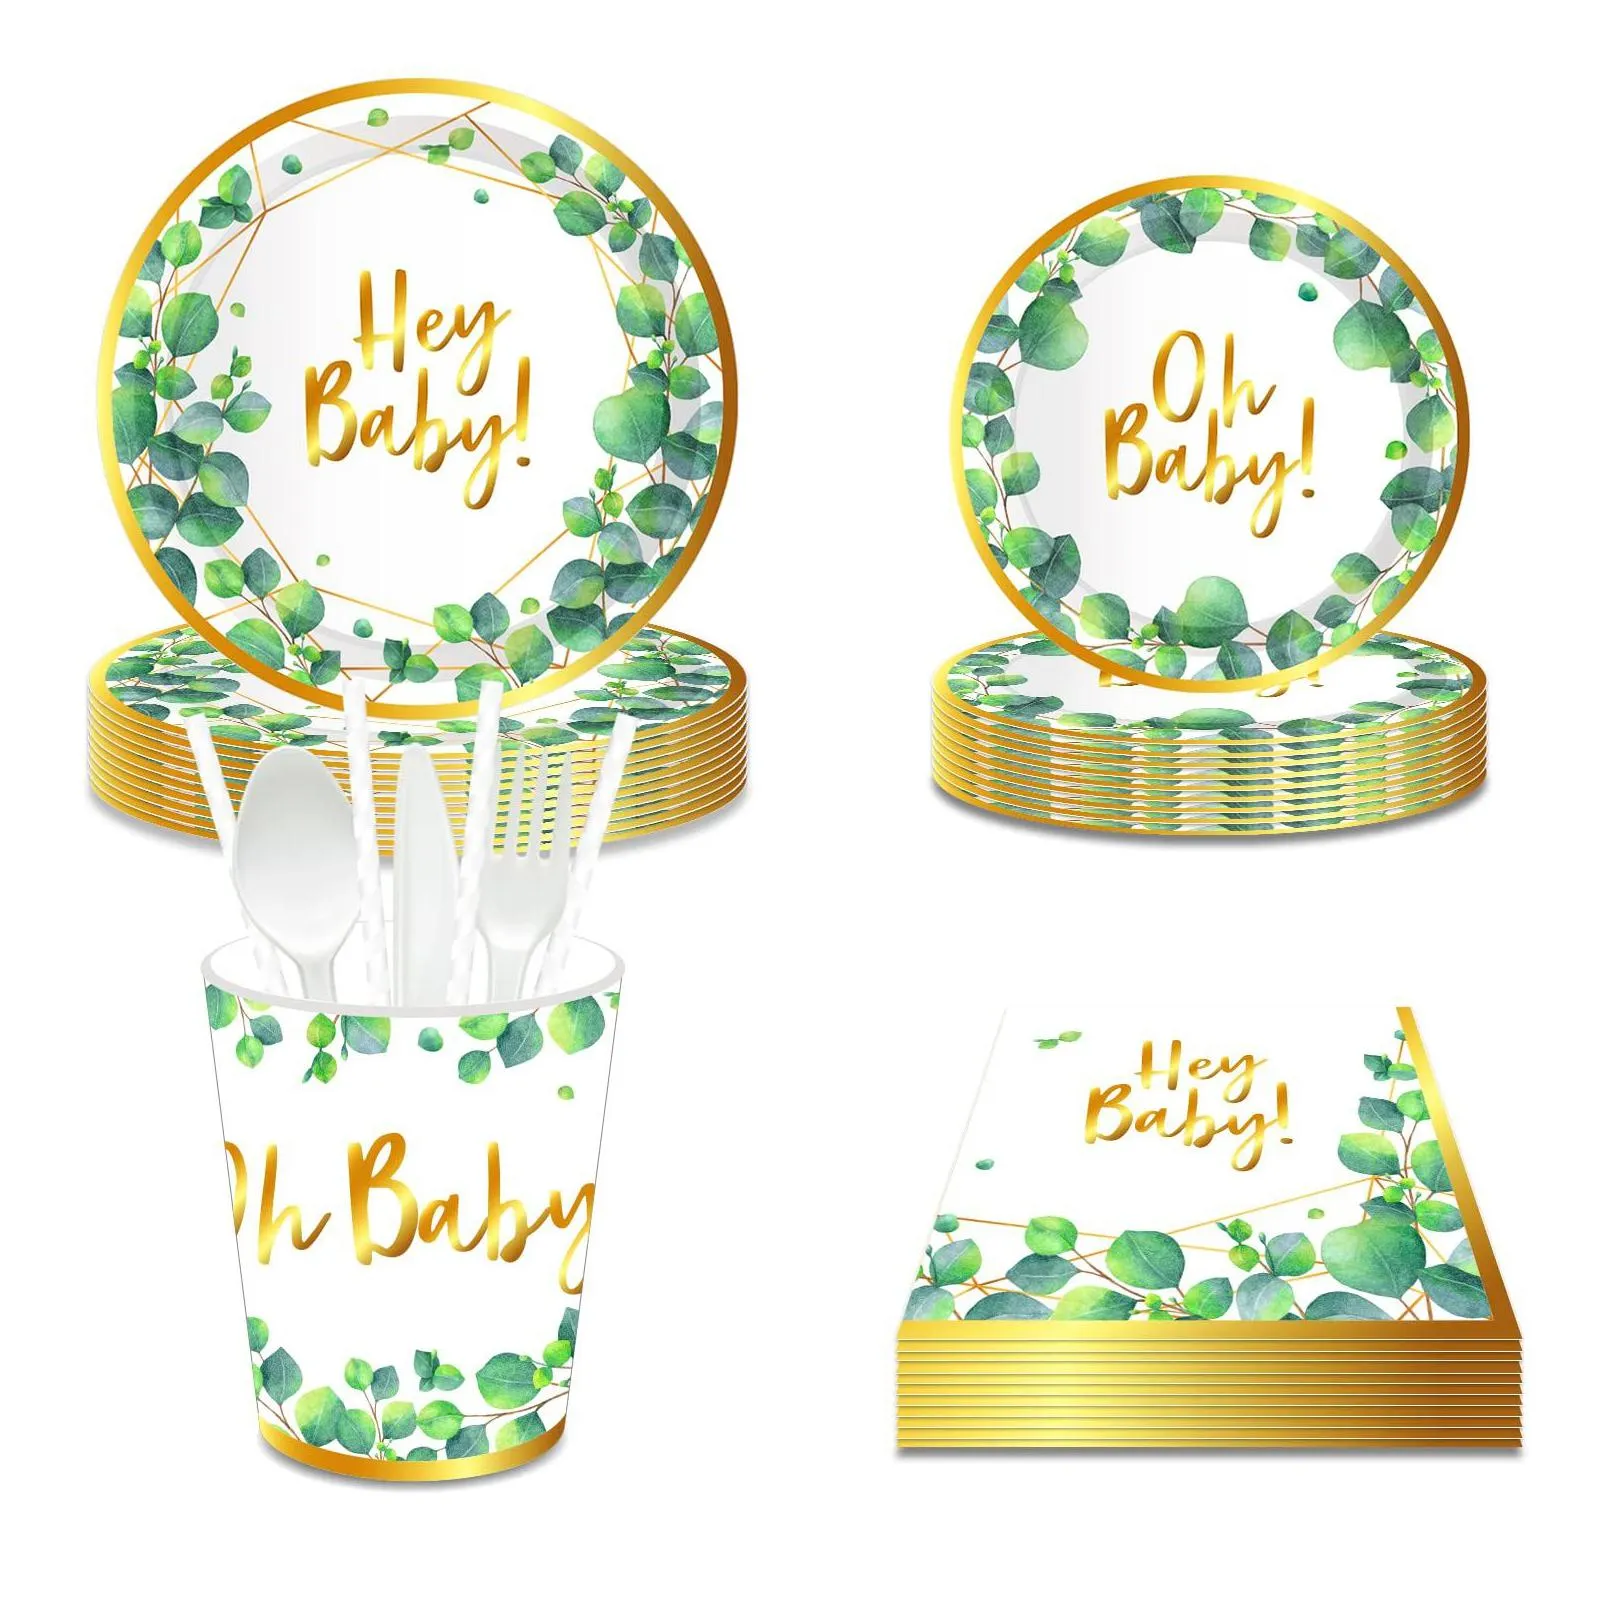 eucalyptus plates hey baby plates oh baby plates and napkins baby shower birthday plates green floral party supplies serves 8 guests for plates napkin cups